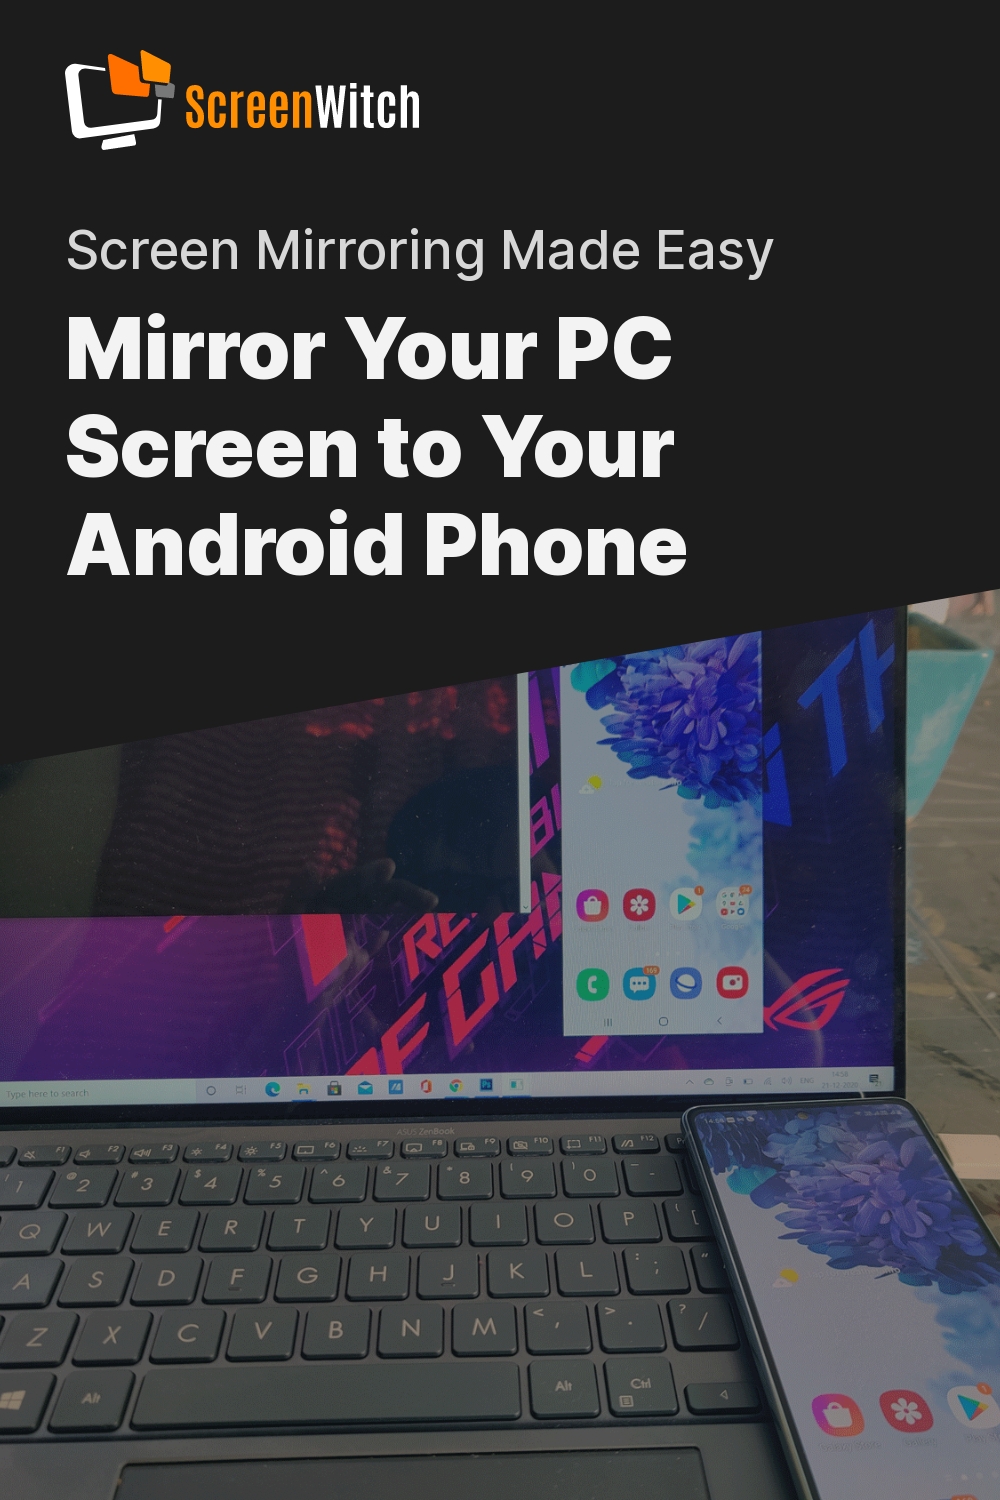 Mirror Your PC Screen to Your Android Phone - Screen Mirroring Made Easy